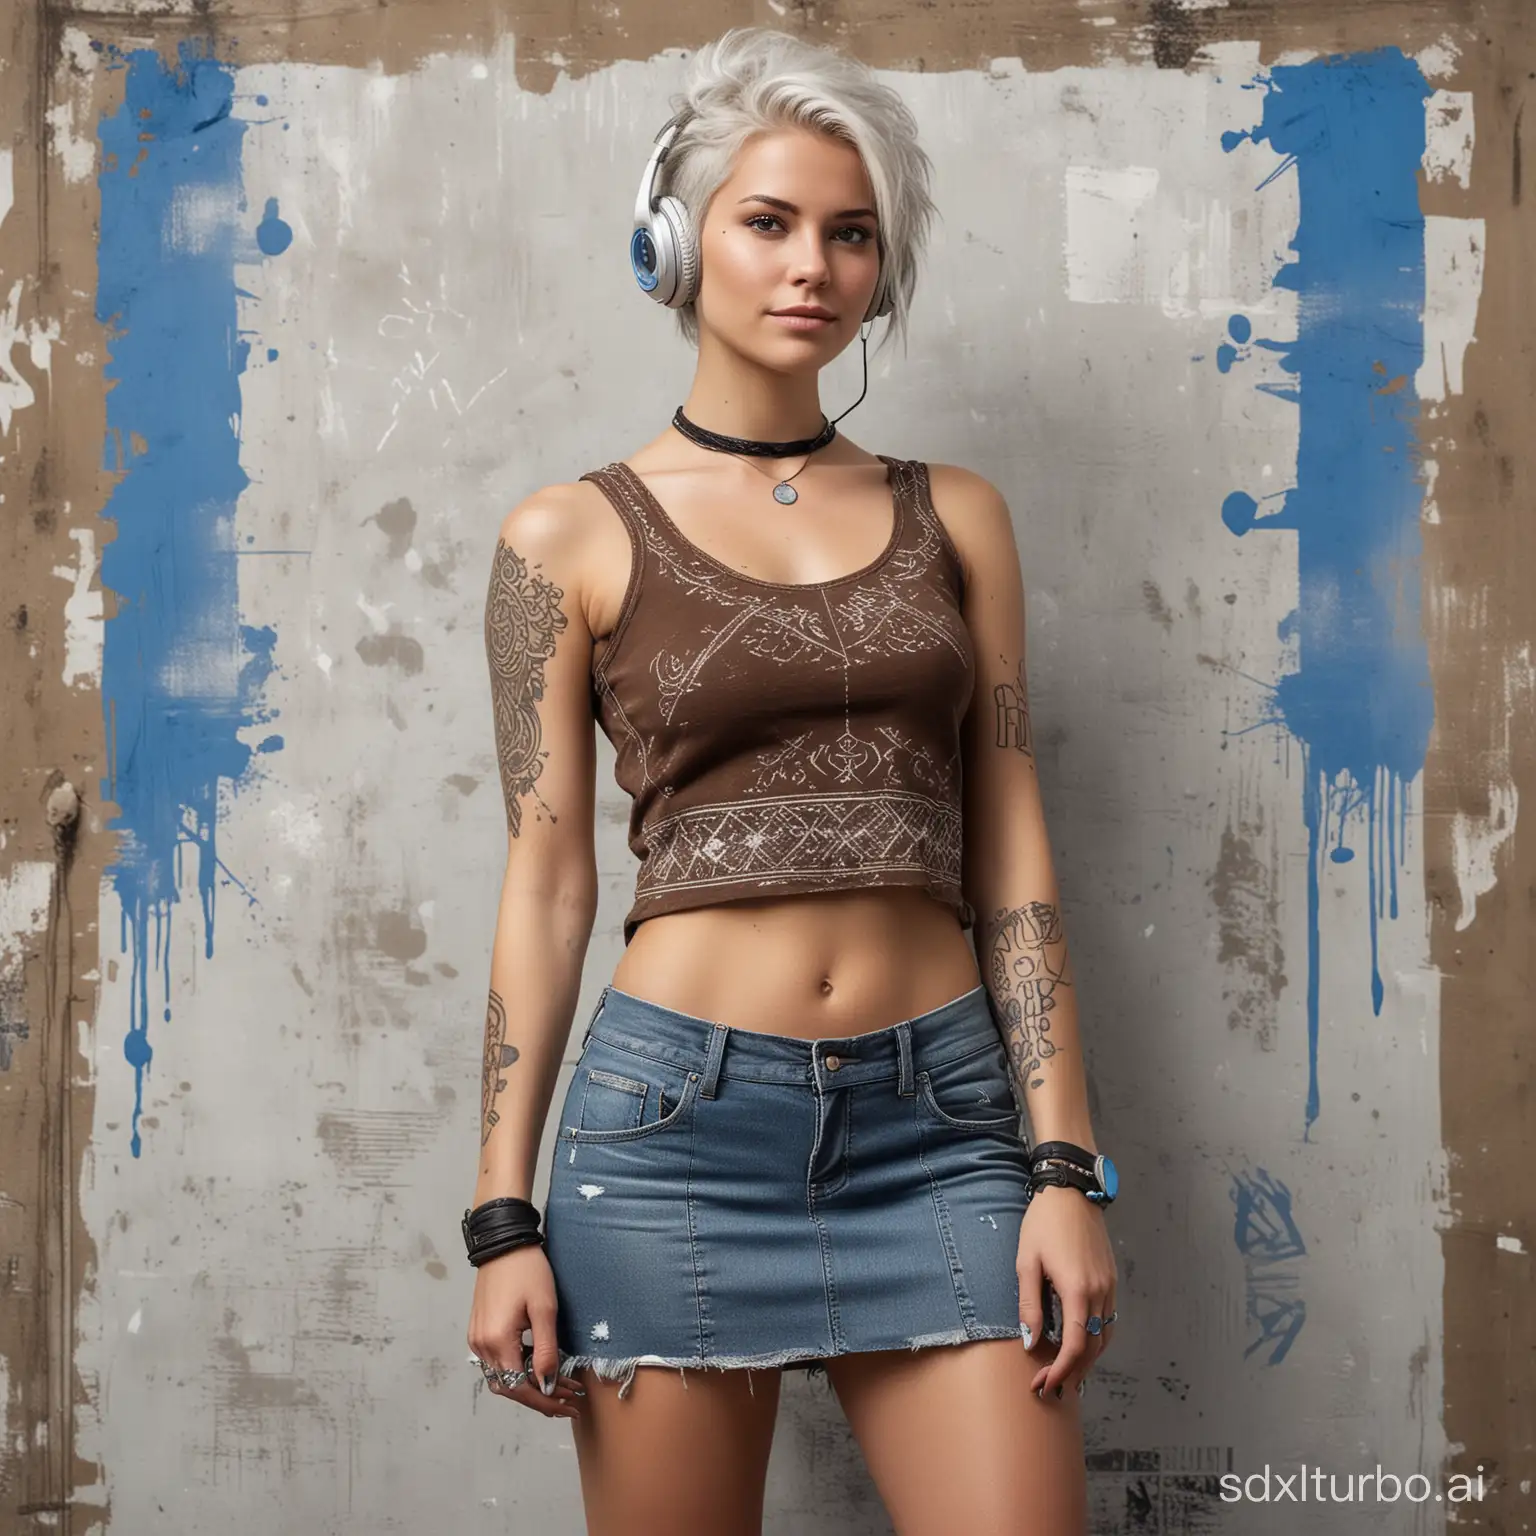 A (((Viking woman))) dressed in a (((brown fur top))), stylishly paired with a short, distressed ((gray mini skirt)), sporting messy long, white hair and intricate (war blue) facial tattoos, accessorizing with sleek headphones and beautifully proportioned legs, all framed under a low angle that captures the (anatomically perfect) symmetry of her figure, with (stencil graffiti) and (tempera paint) colors colorfully juxtaposed in the background, evoking the principles of the golden ratio